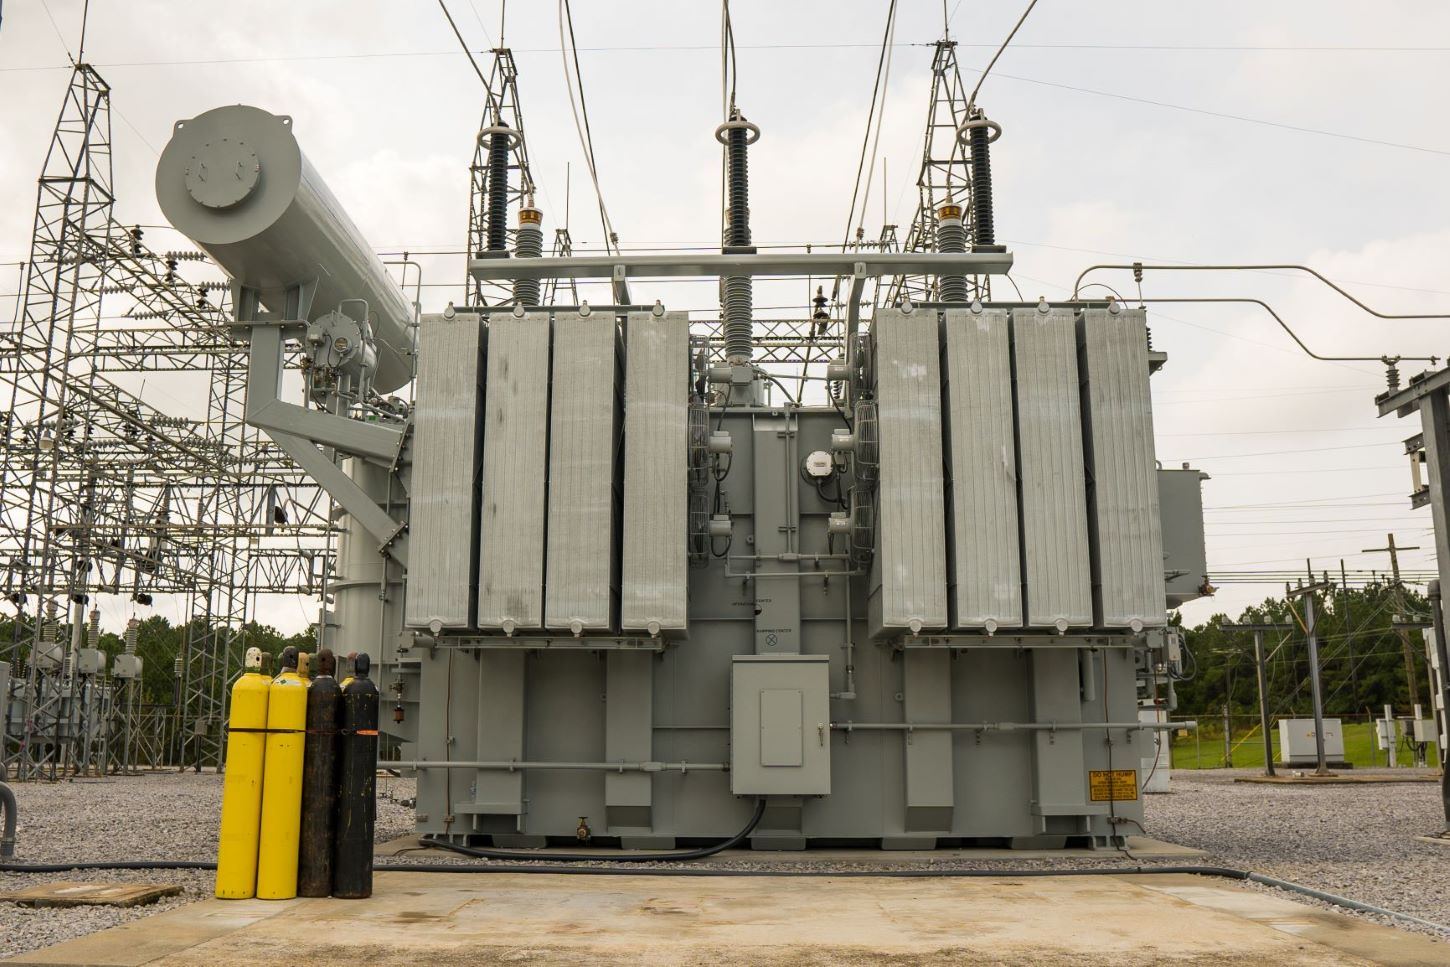 GE Research and Prolec GE Power Up World’s 1st Large Flexible Transformer to Enhance the Resiliency of America’s Grid